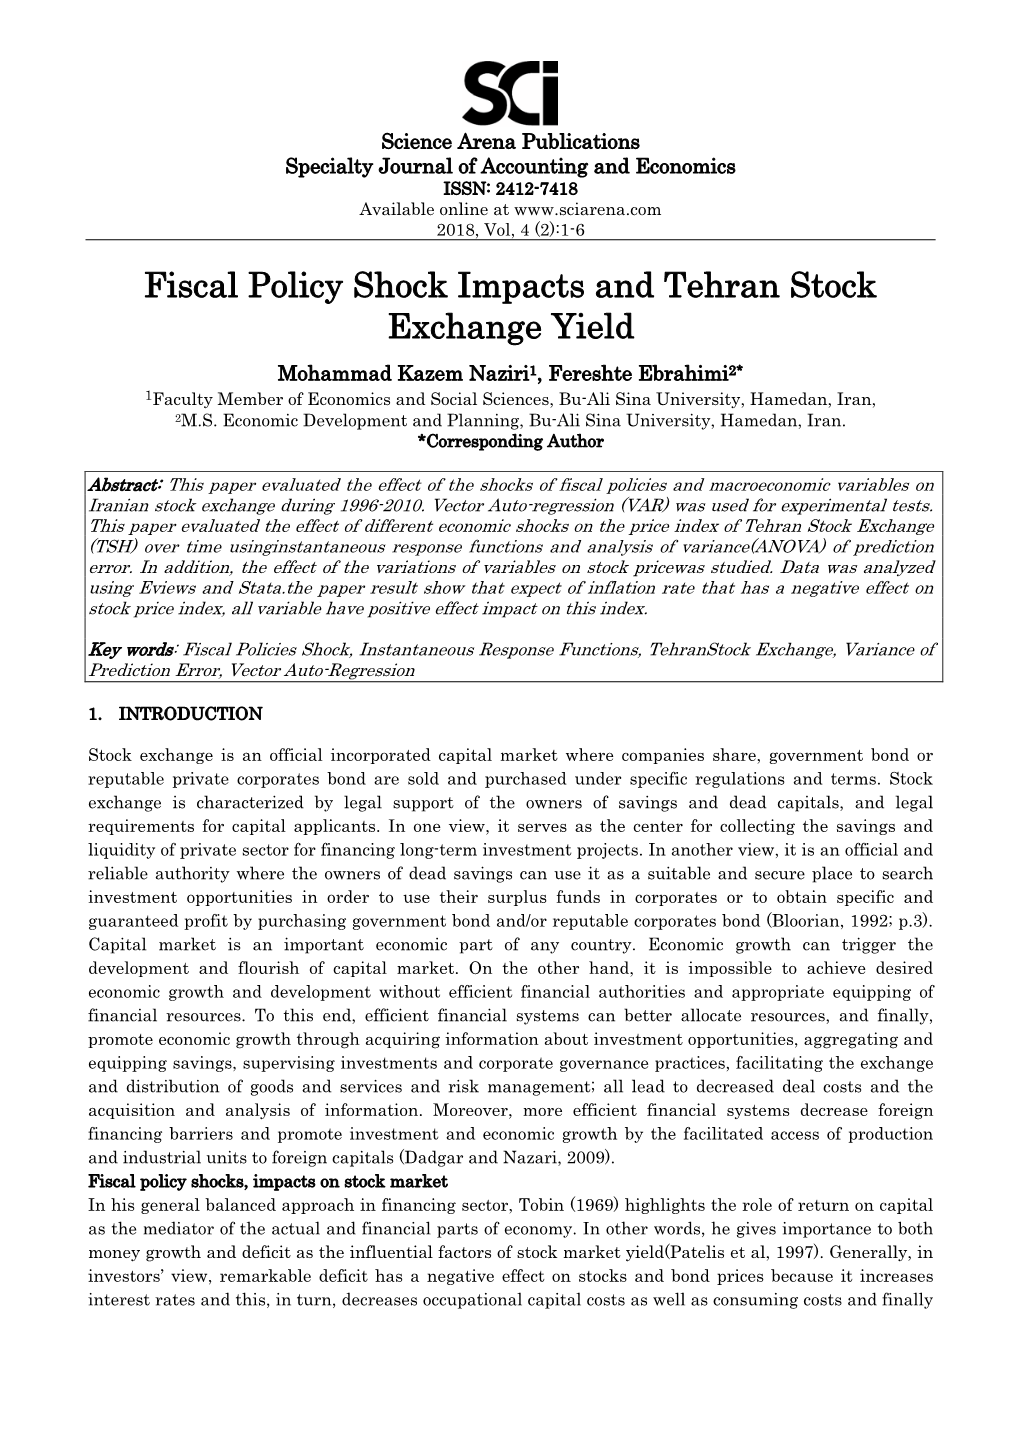 Fiscal Policy Shock Impacts and Tehran Stock Exchange Yield